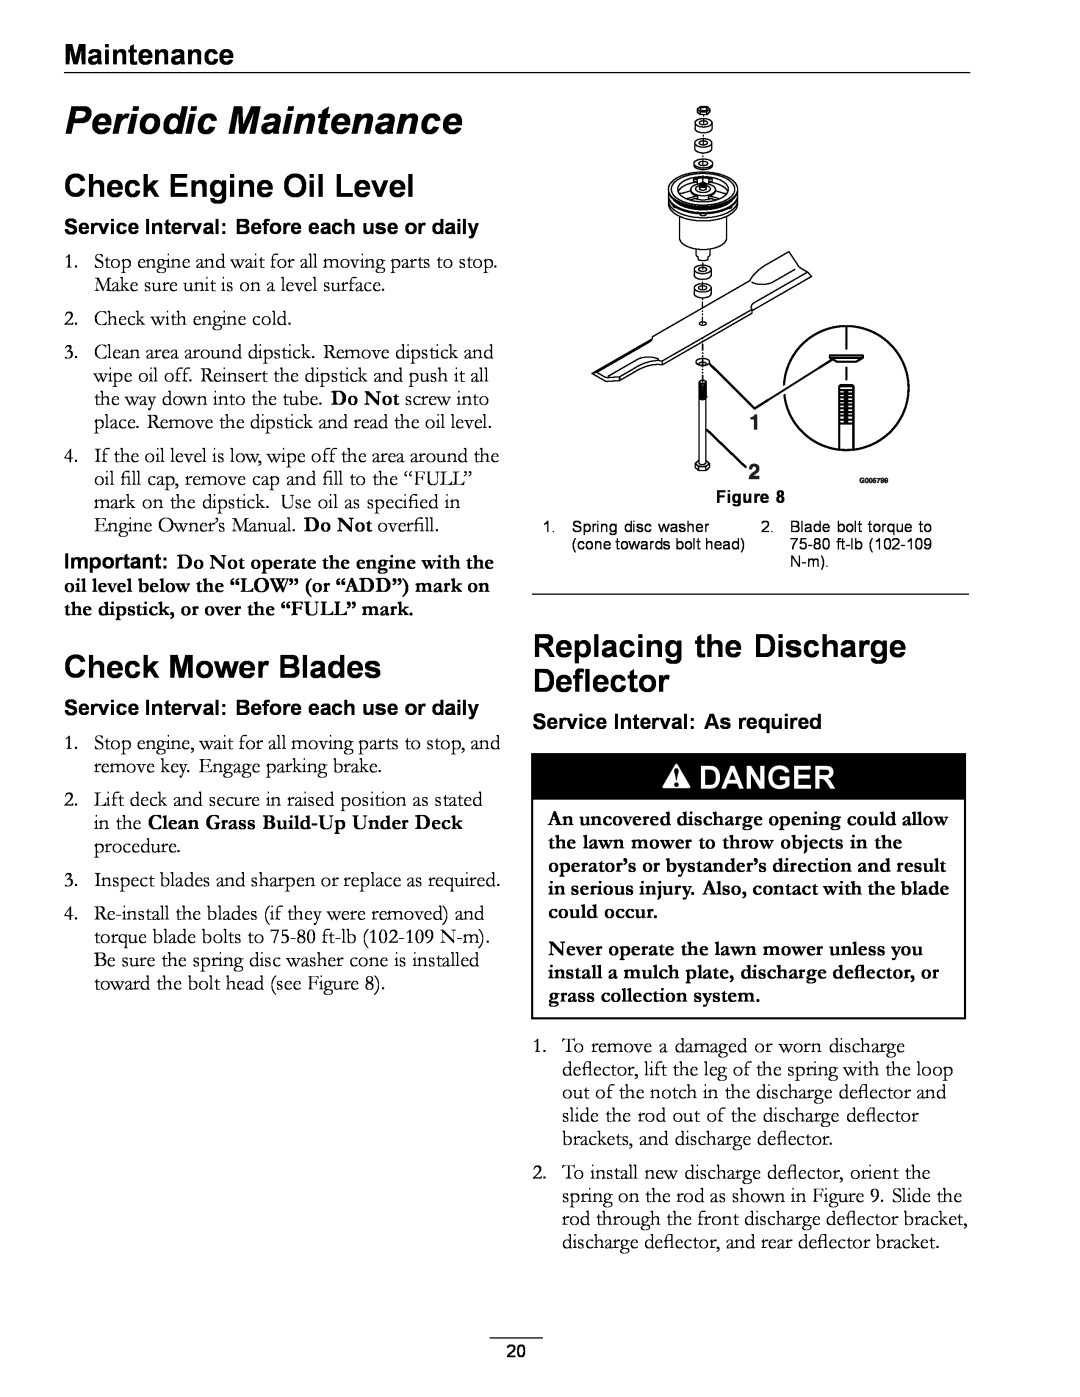 Exmark 4500-352 manual Periodic Maintenance, Check Engine Oil Level, Check Mower Blades, Replacing the Discharge Deflector 